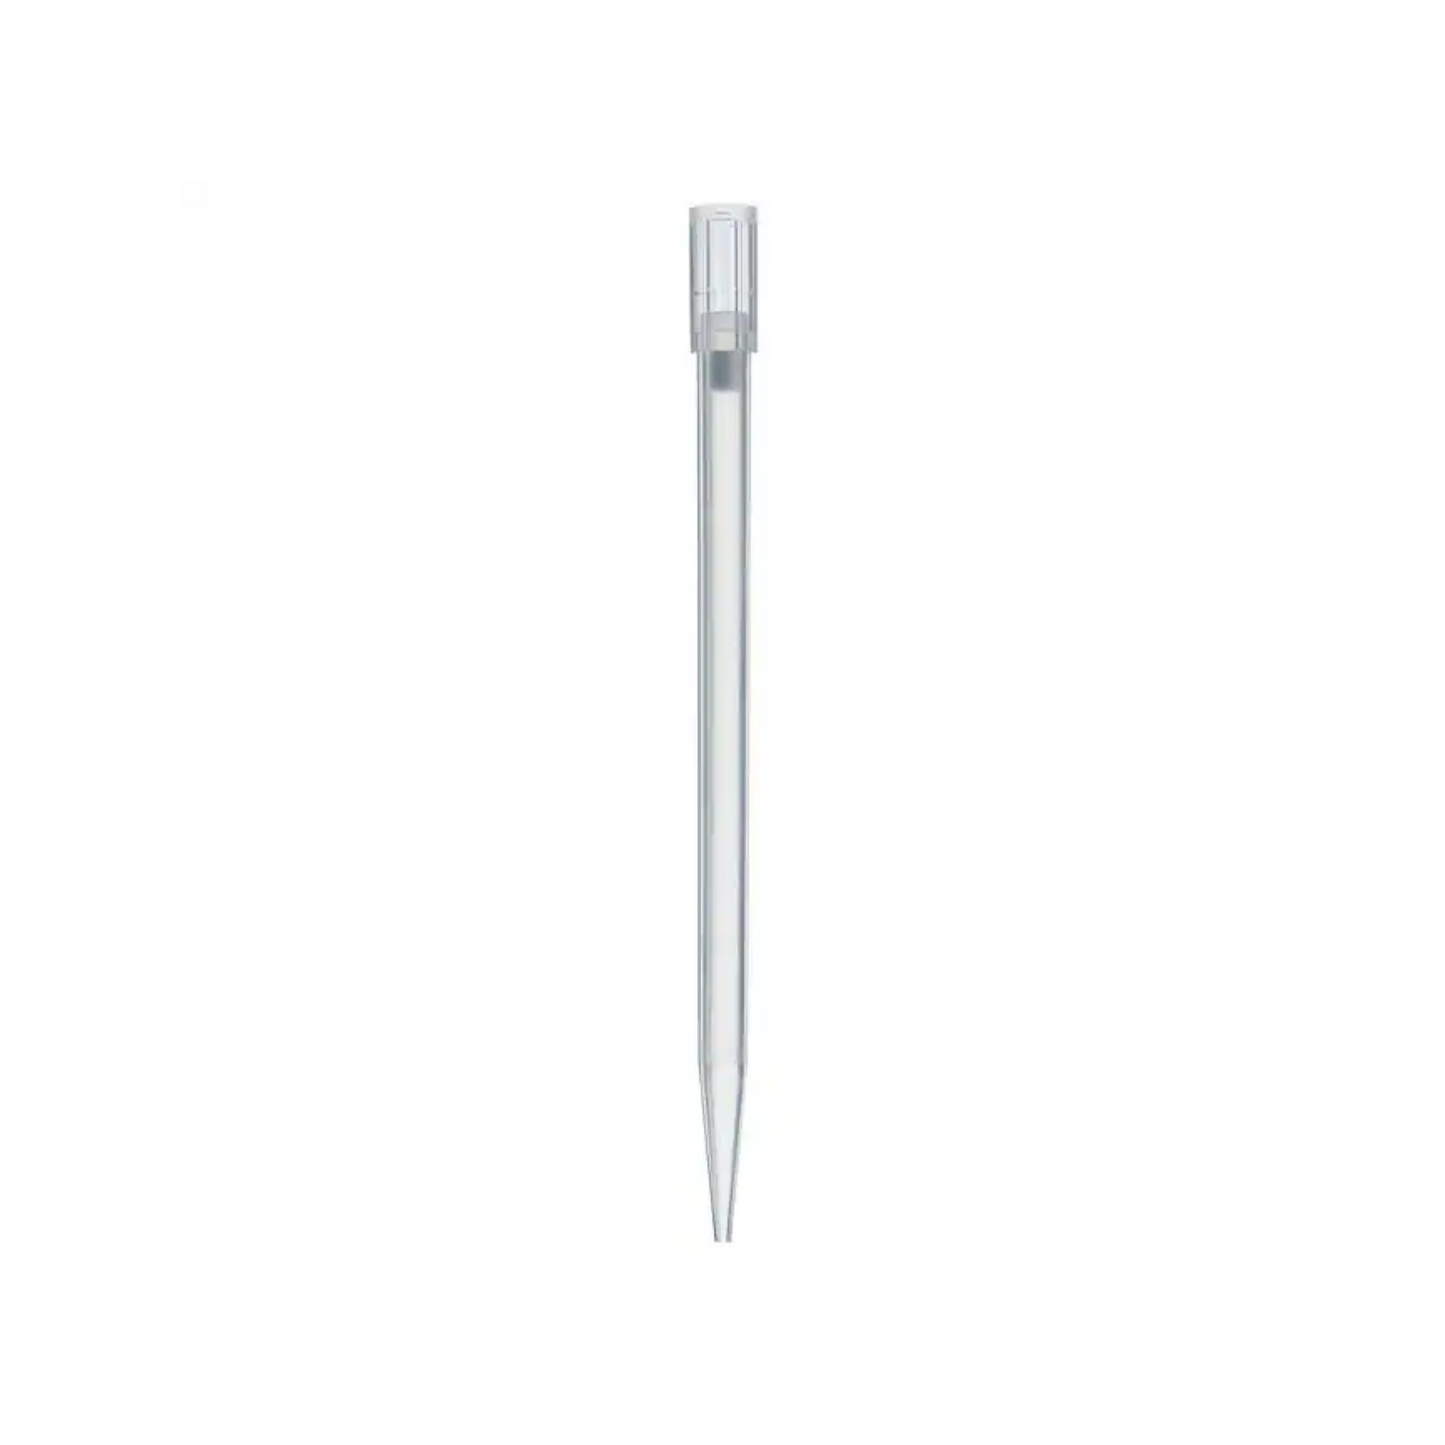 Thermo Scientific 125μL ClipTip, Filtered, Sterile, 384-Format Pipette Tips, Pack of 3840 (94420153)